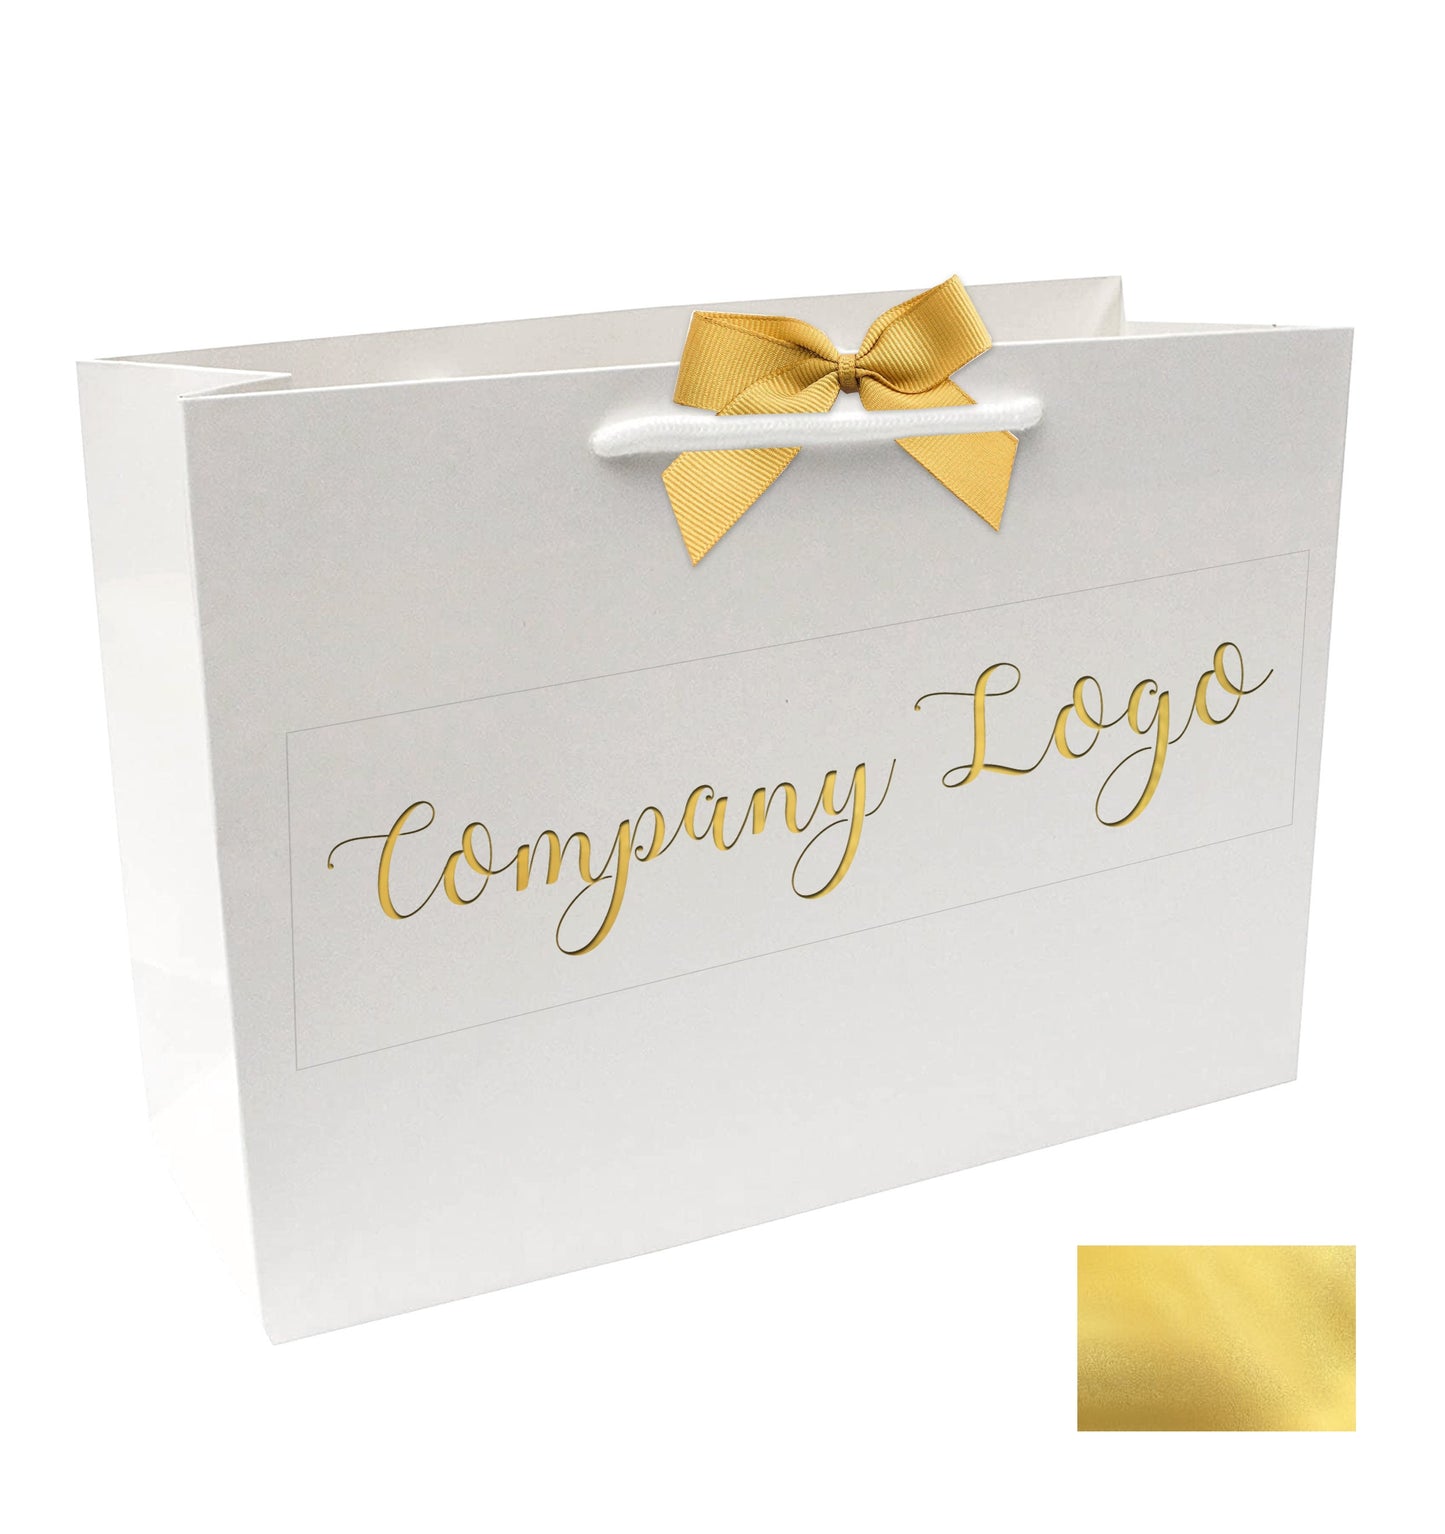 Small Custom printed gift bags gold silver rose gold with bow foil printed logo retail packaging corporate